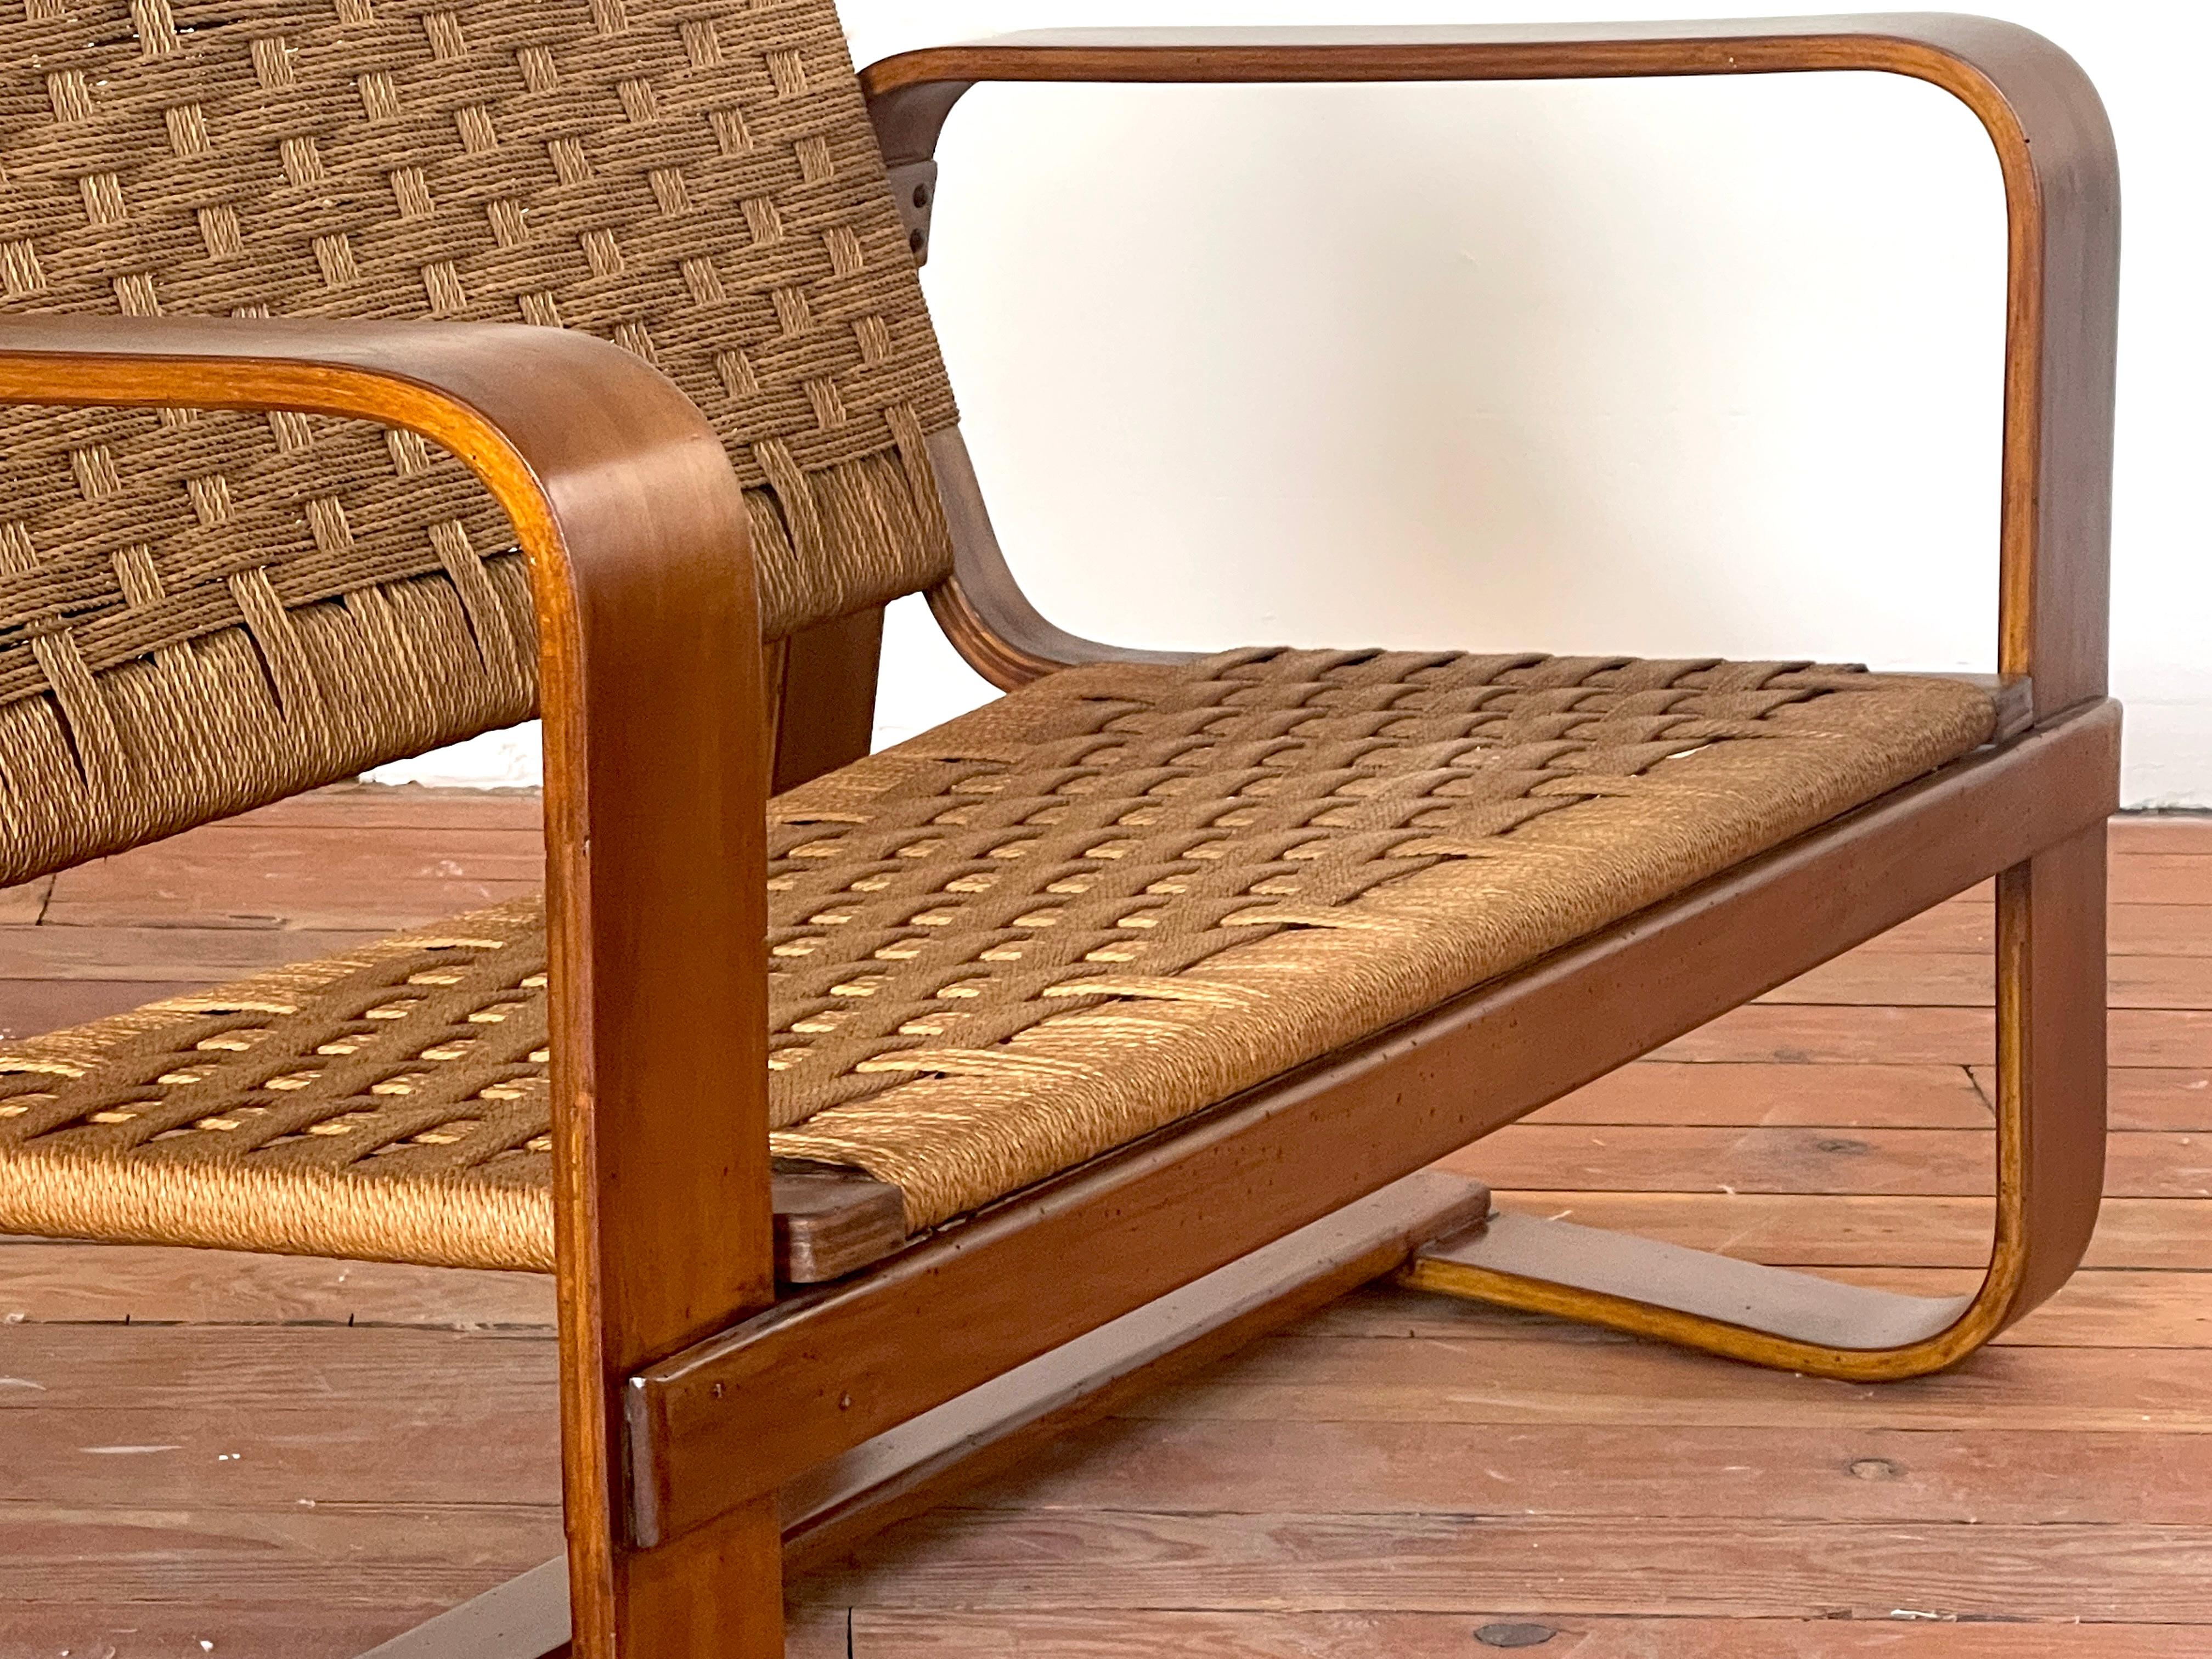 Guiseppe Pagano Pogatschnig Bench, 1939 For Sale 3